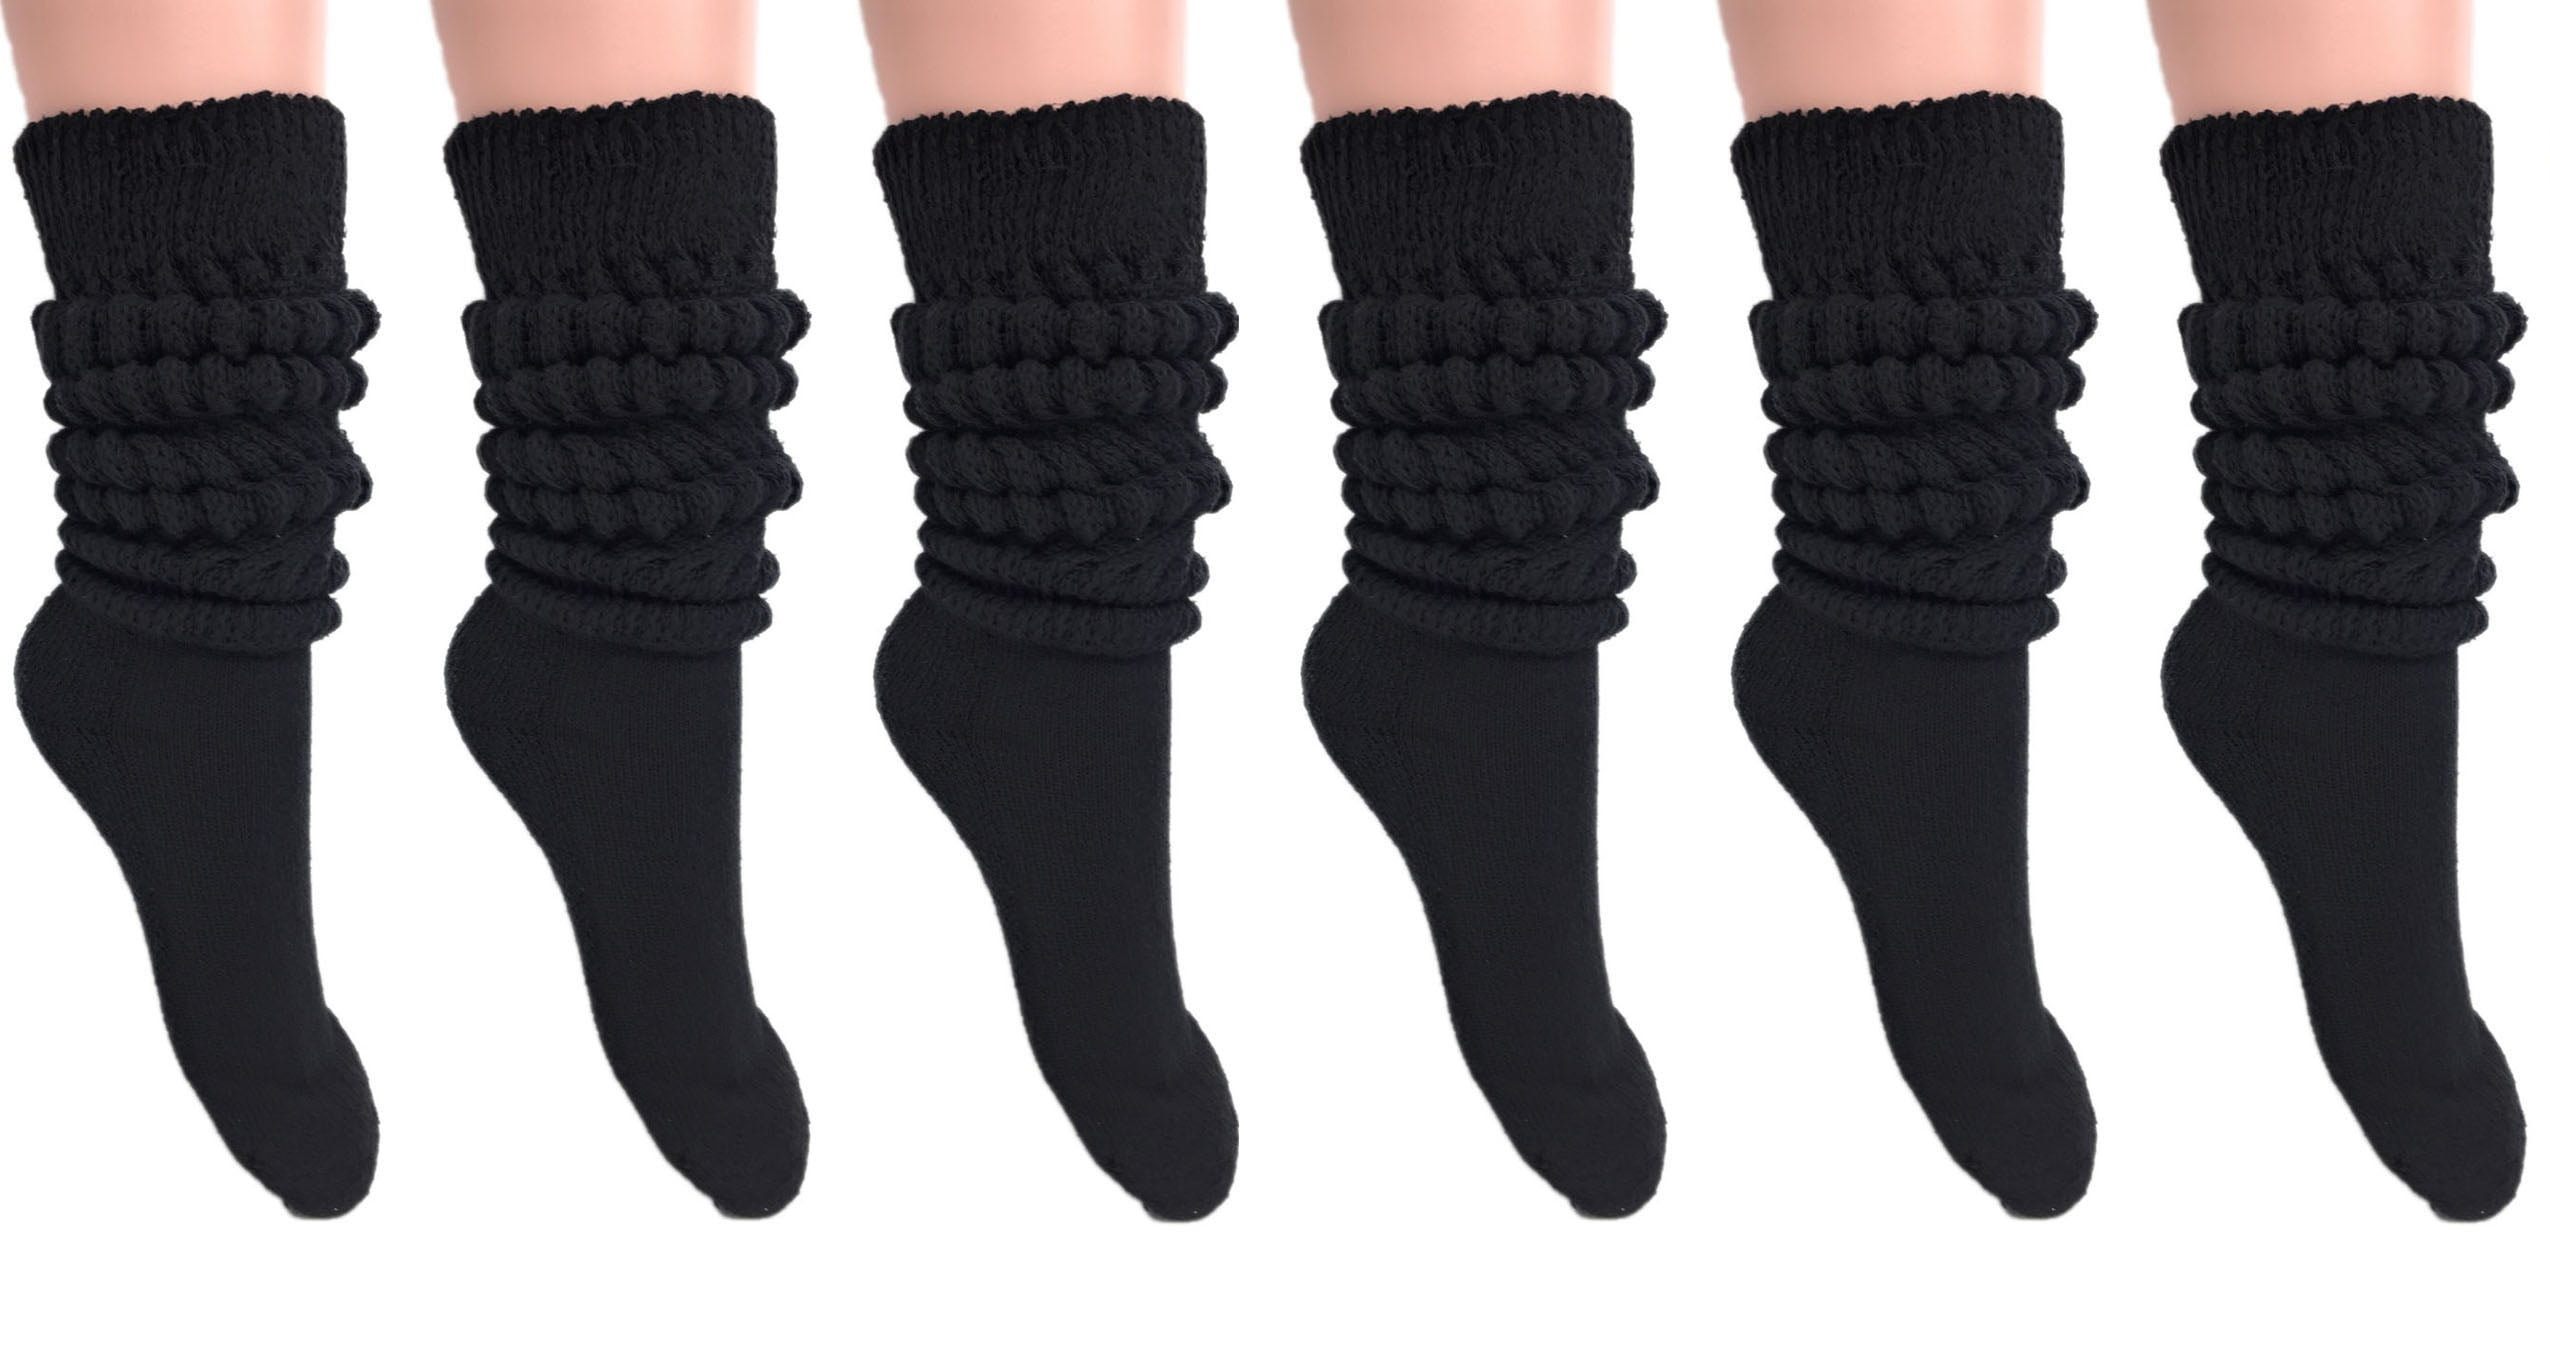 AWS/American Made - Heavy Slouch Socks for Women Black 6 Pair Size 9-11 ...